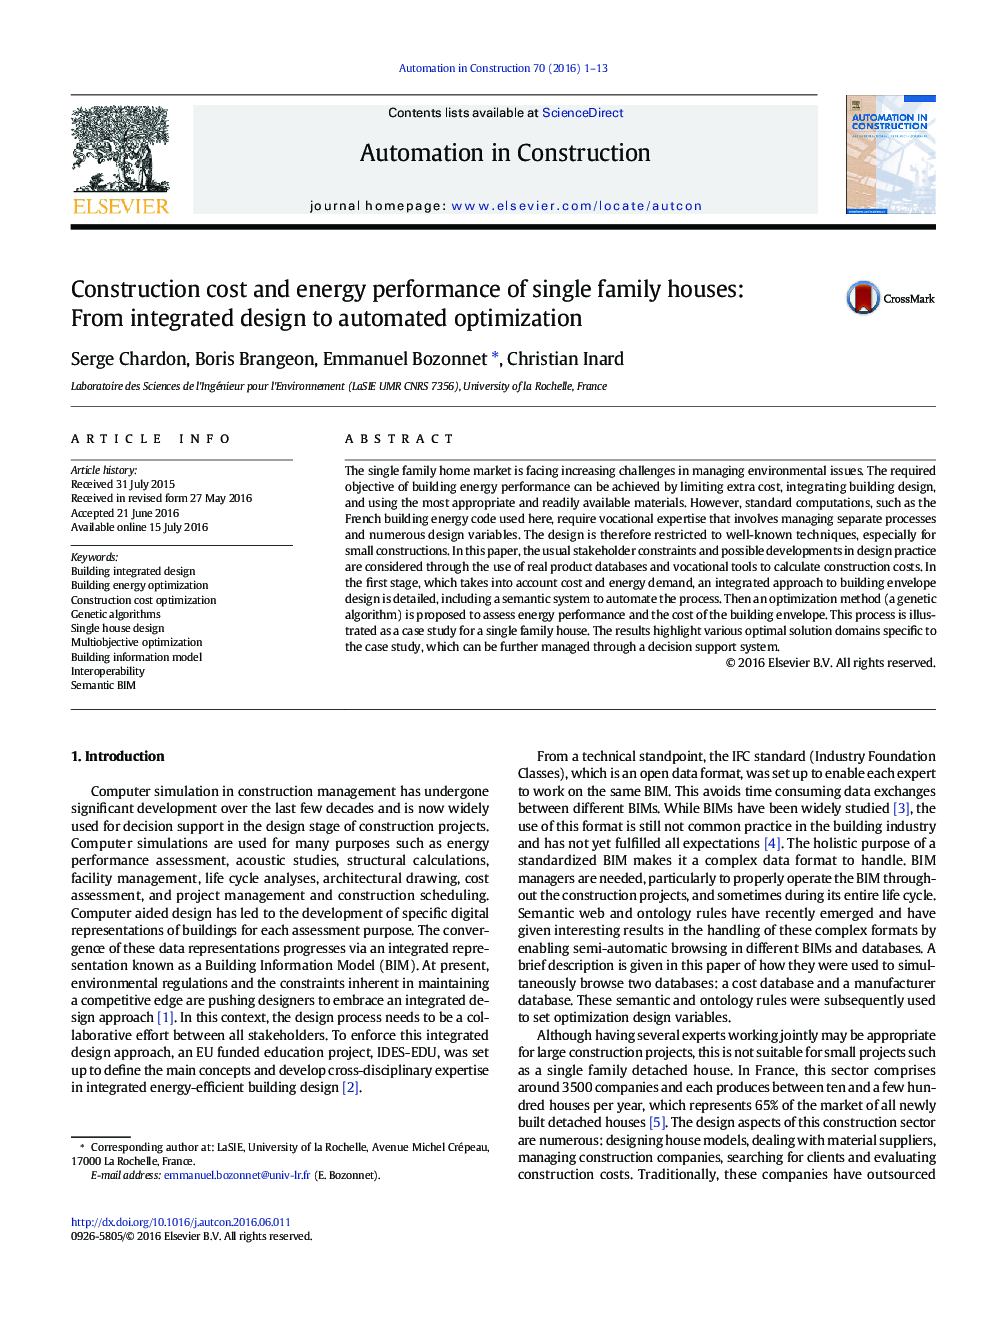 Construction cost and energy performance of single family houses: From integrated design to automated optimization